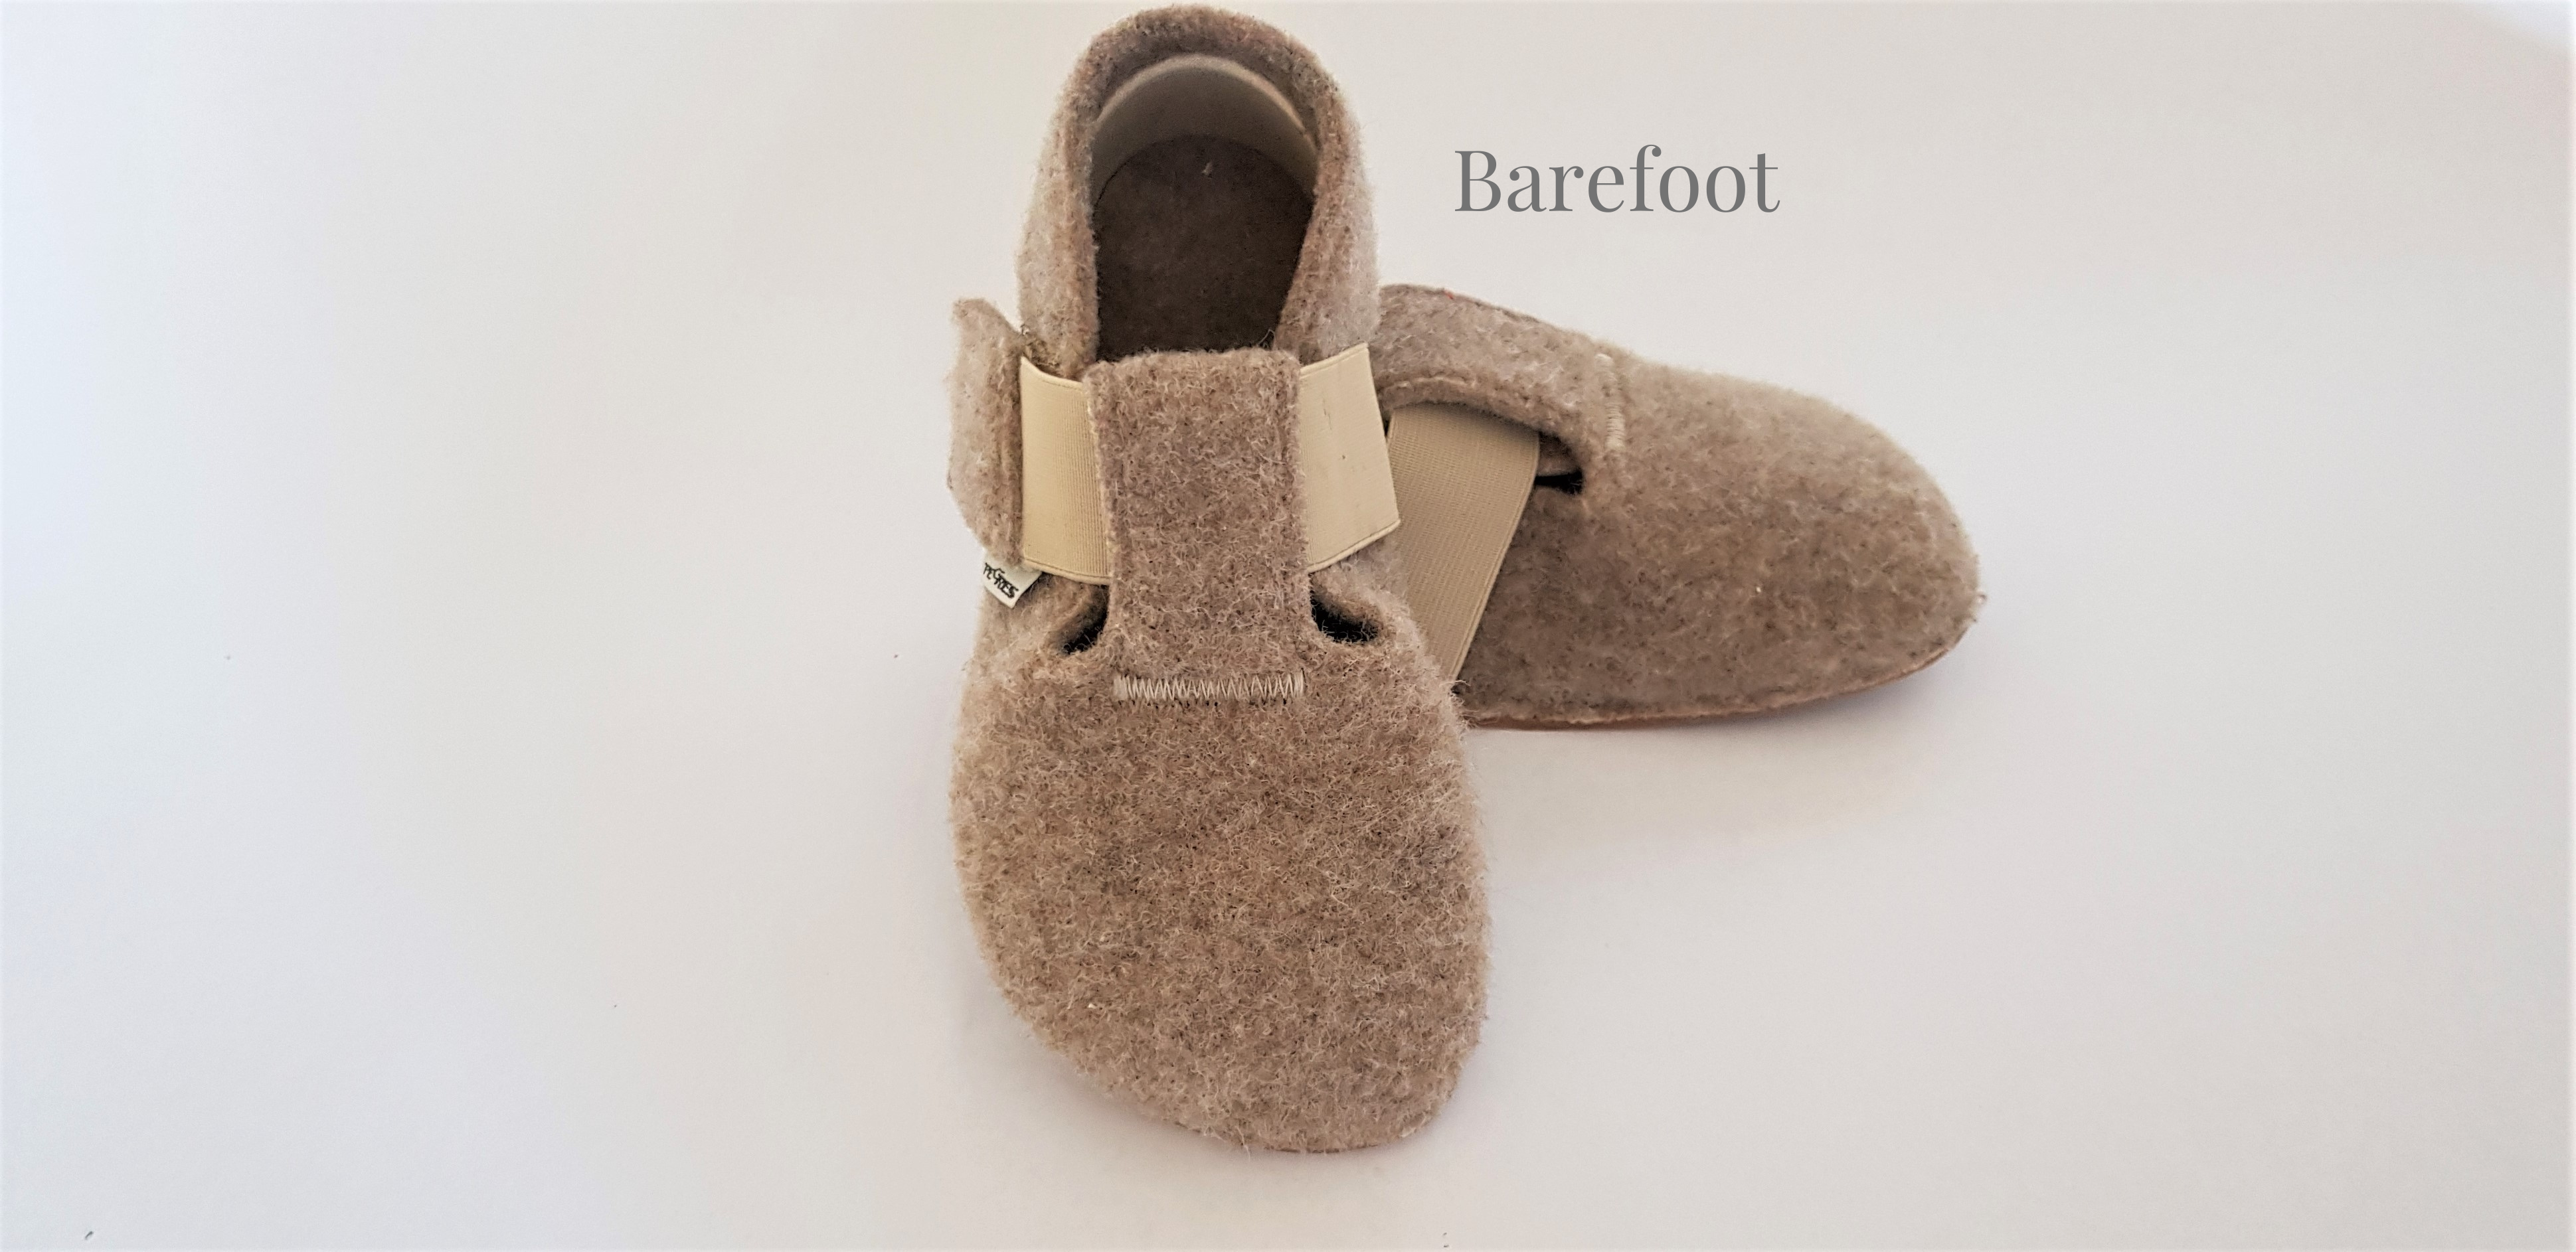 Warm barefoot slippers made from recycled polyester for toddlers and children with anatomically shaped toe box